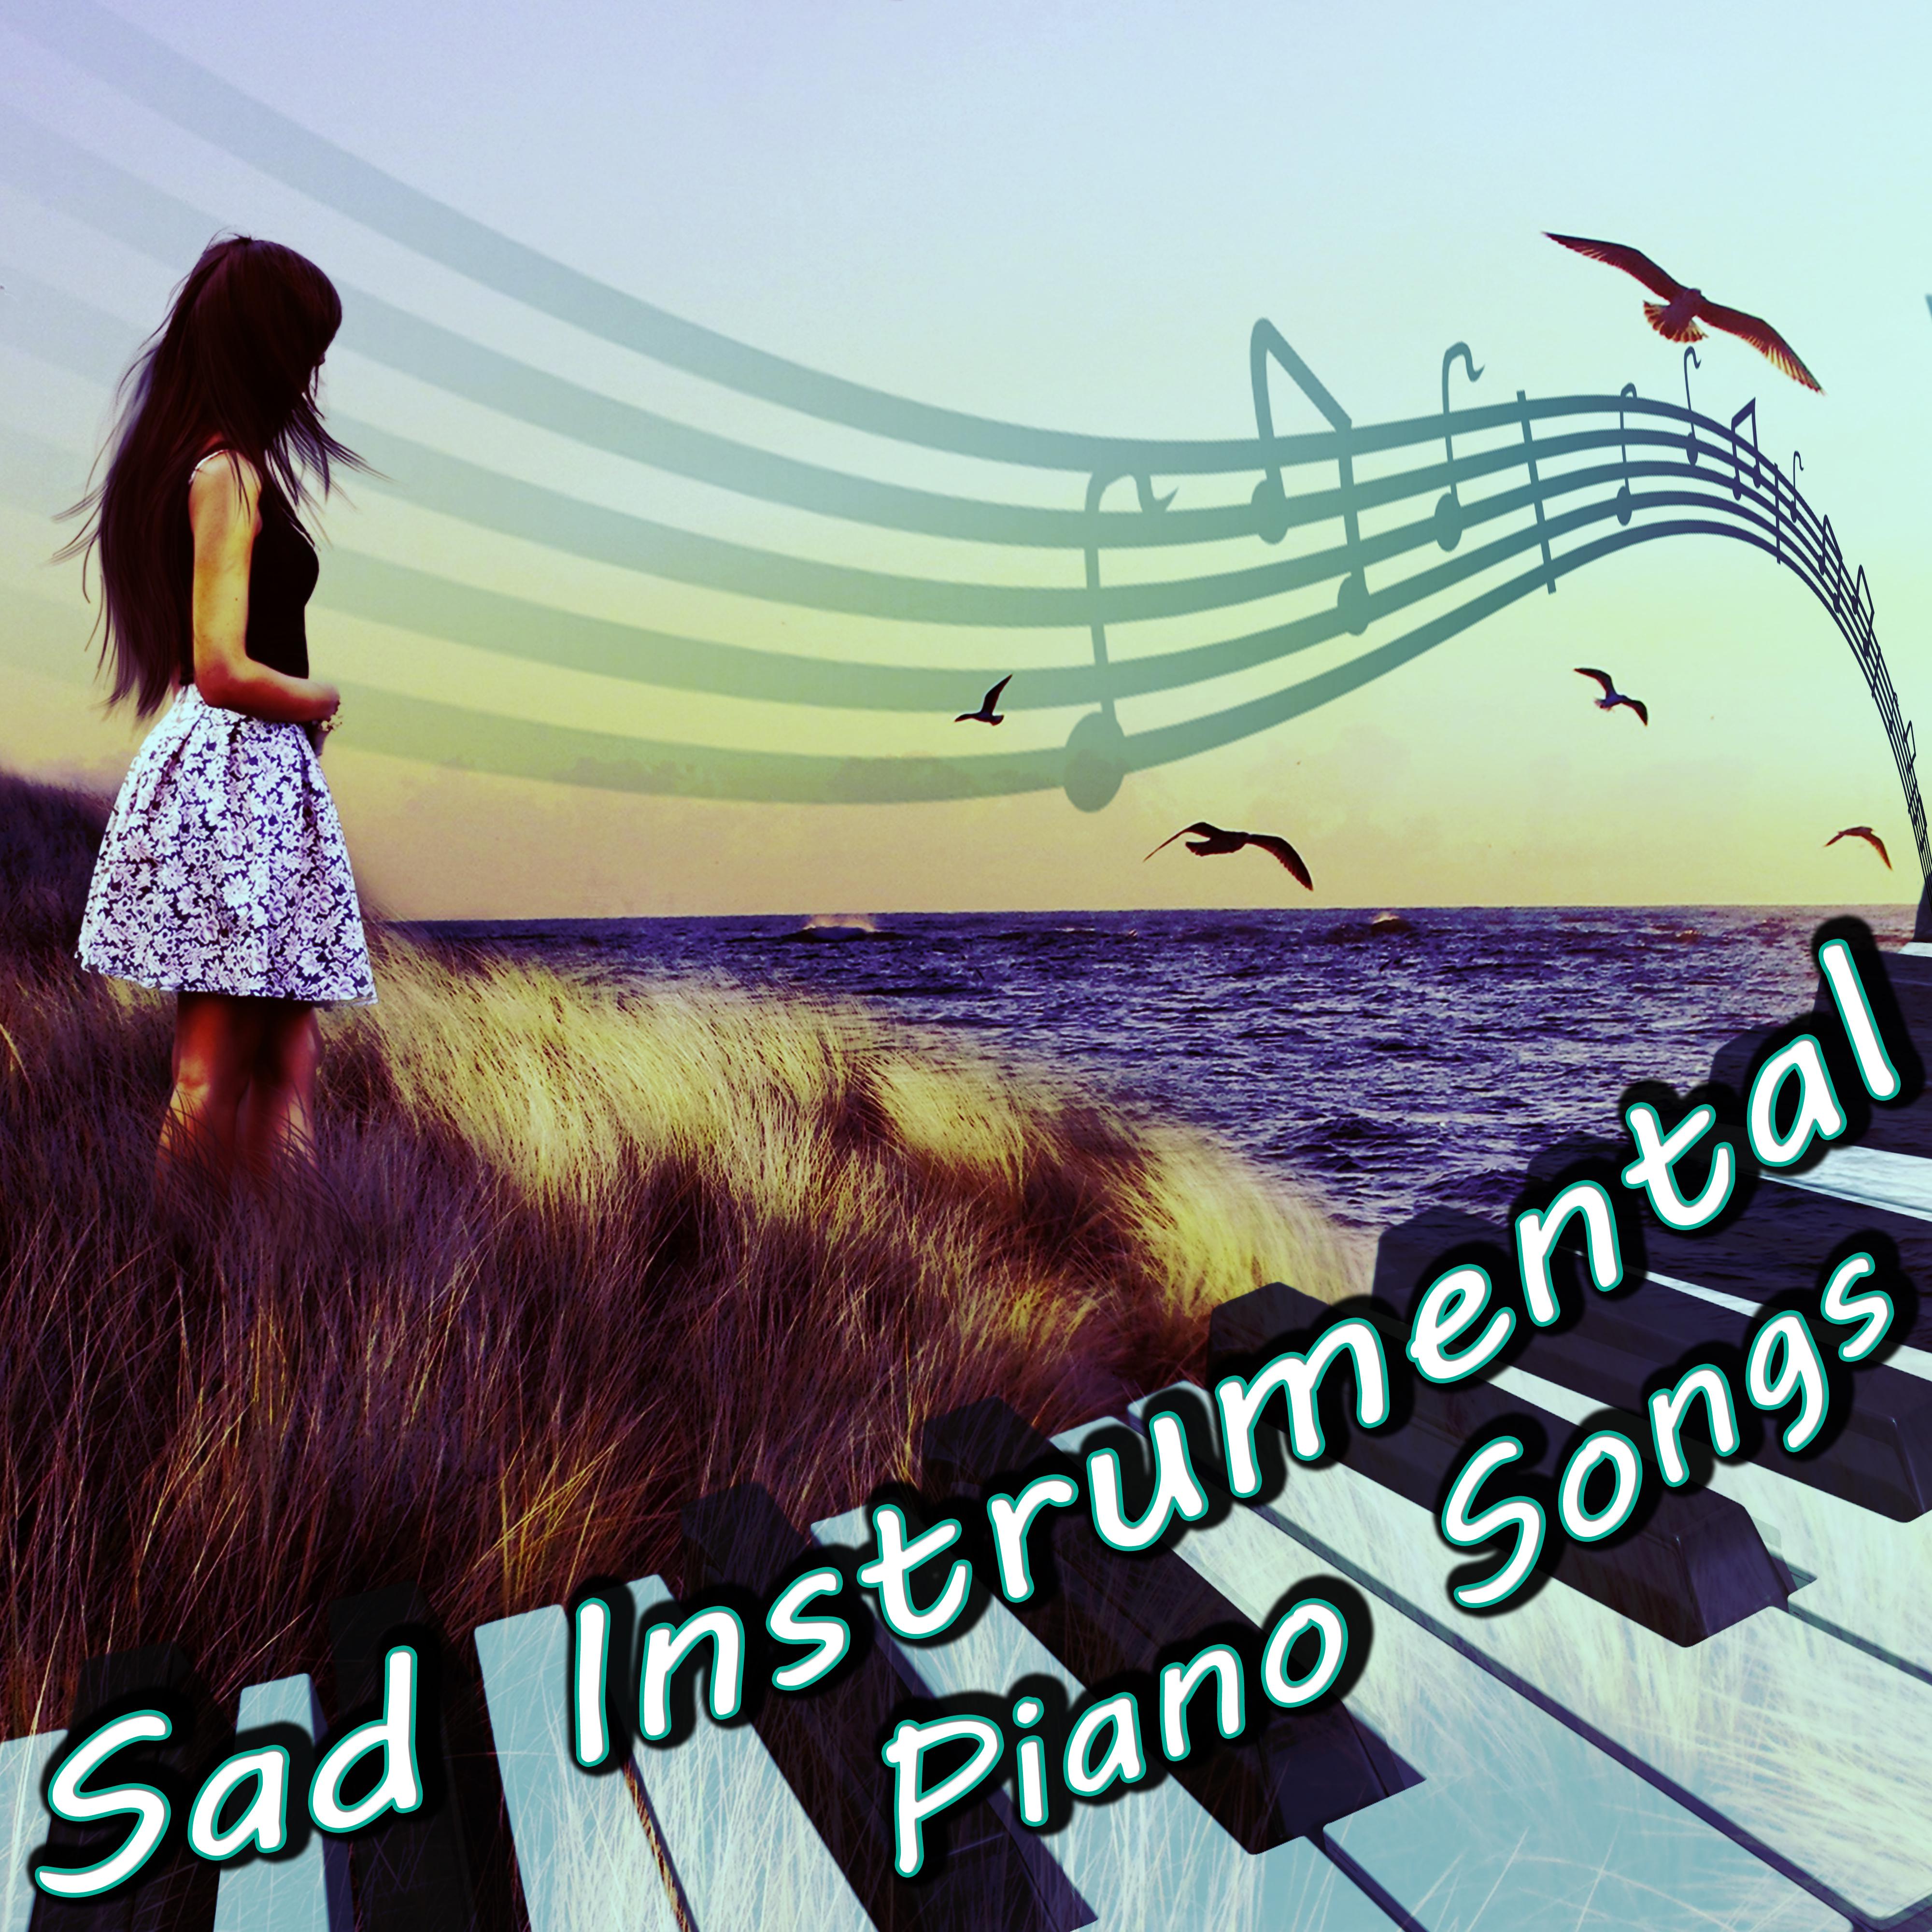 Sad Instrumental Piano Songs  Sentimental Journey for Broken Heart, Music That Will Make You Cry, Sad Love Songs for Melancholic Evening with Glass of Wine, Sad Life, Sad Story, Sad Piano